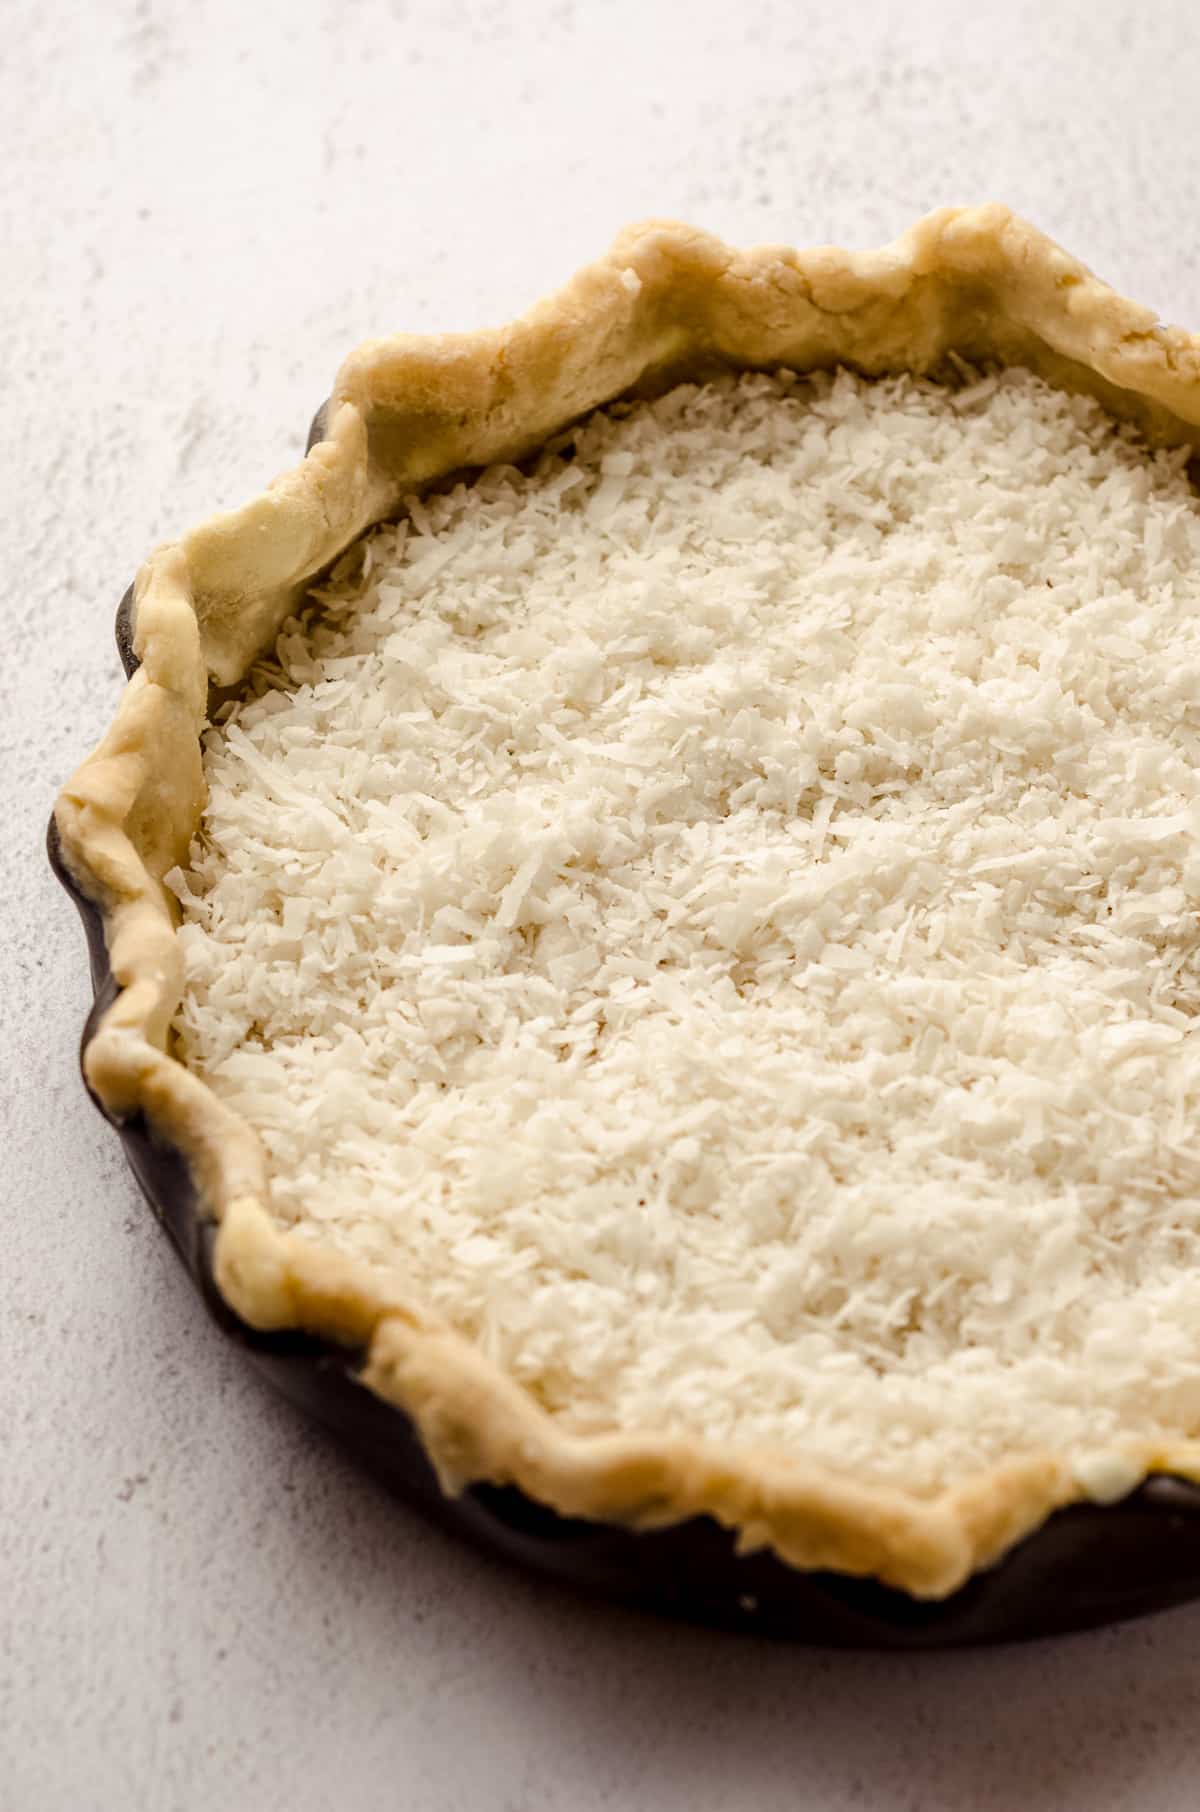 A pie crust in a pie dish, with a layer of shredded coconut at the bottom.